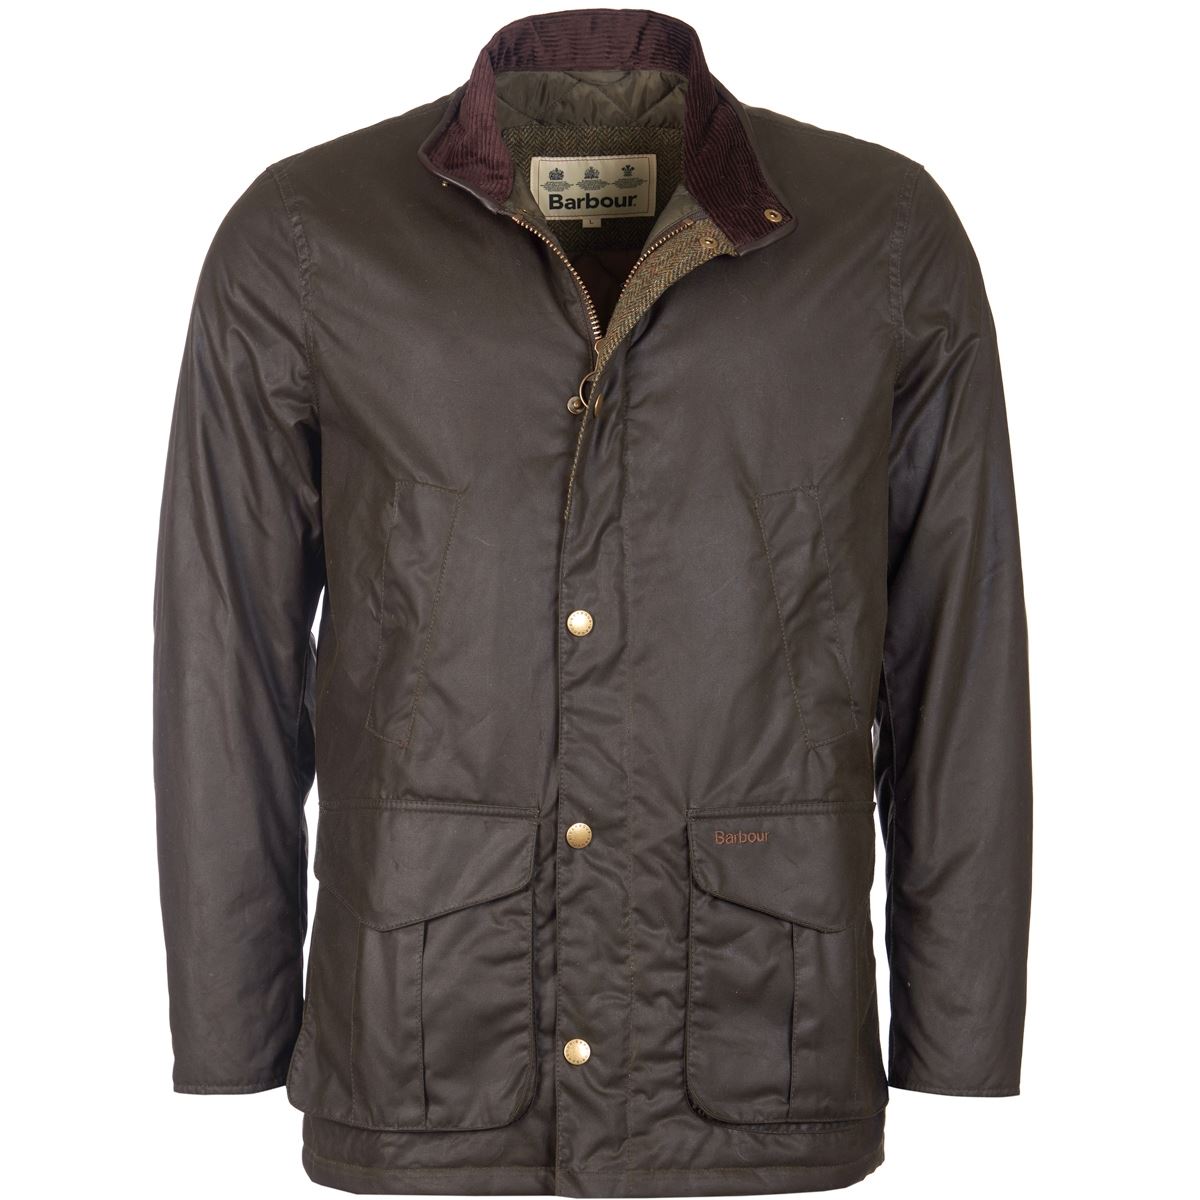 What fabric is used for the Barbour Hereford wax jacket?